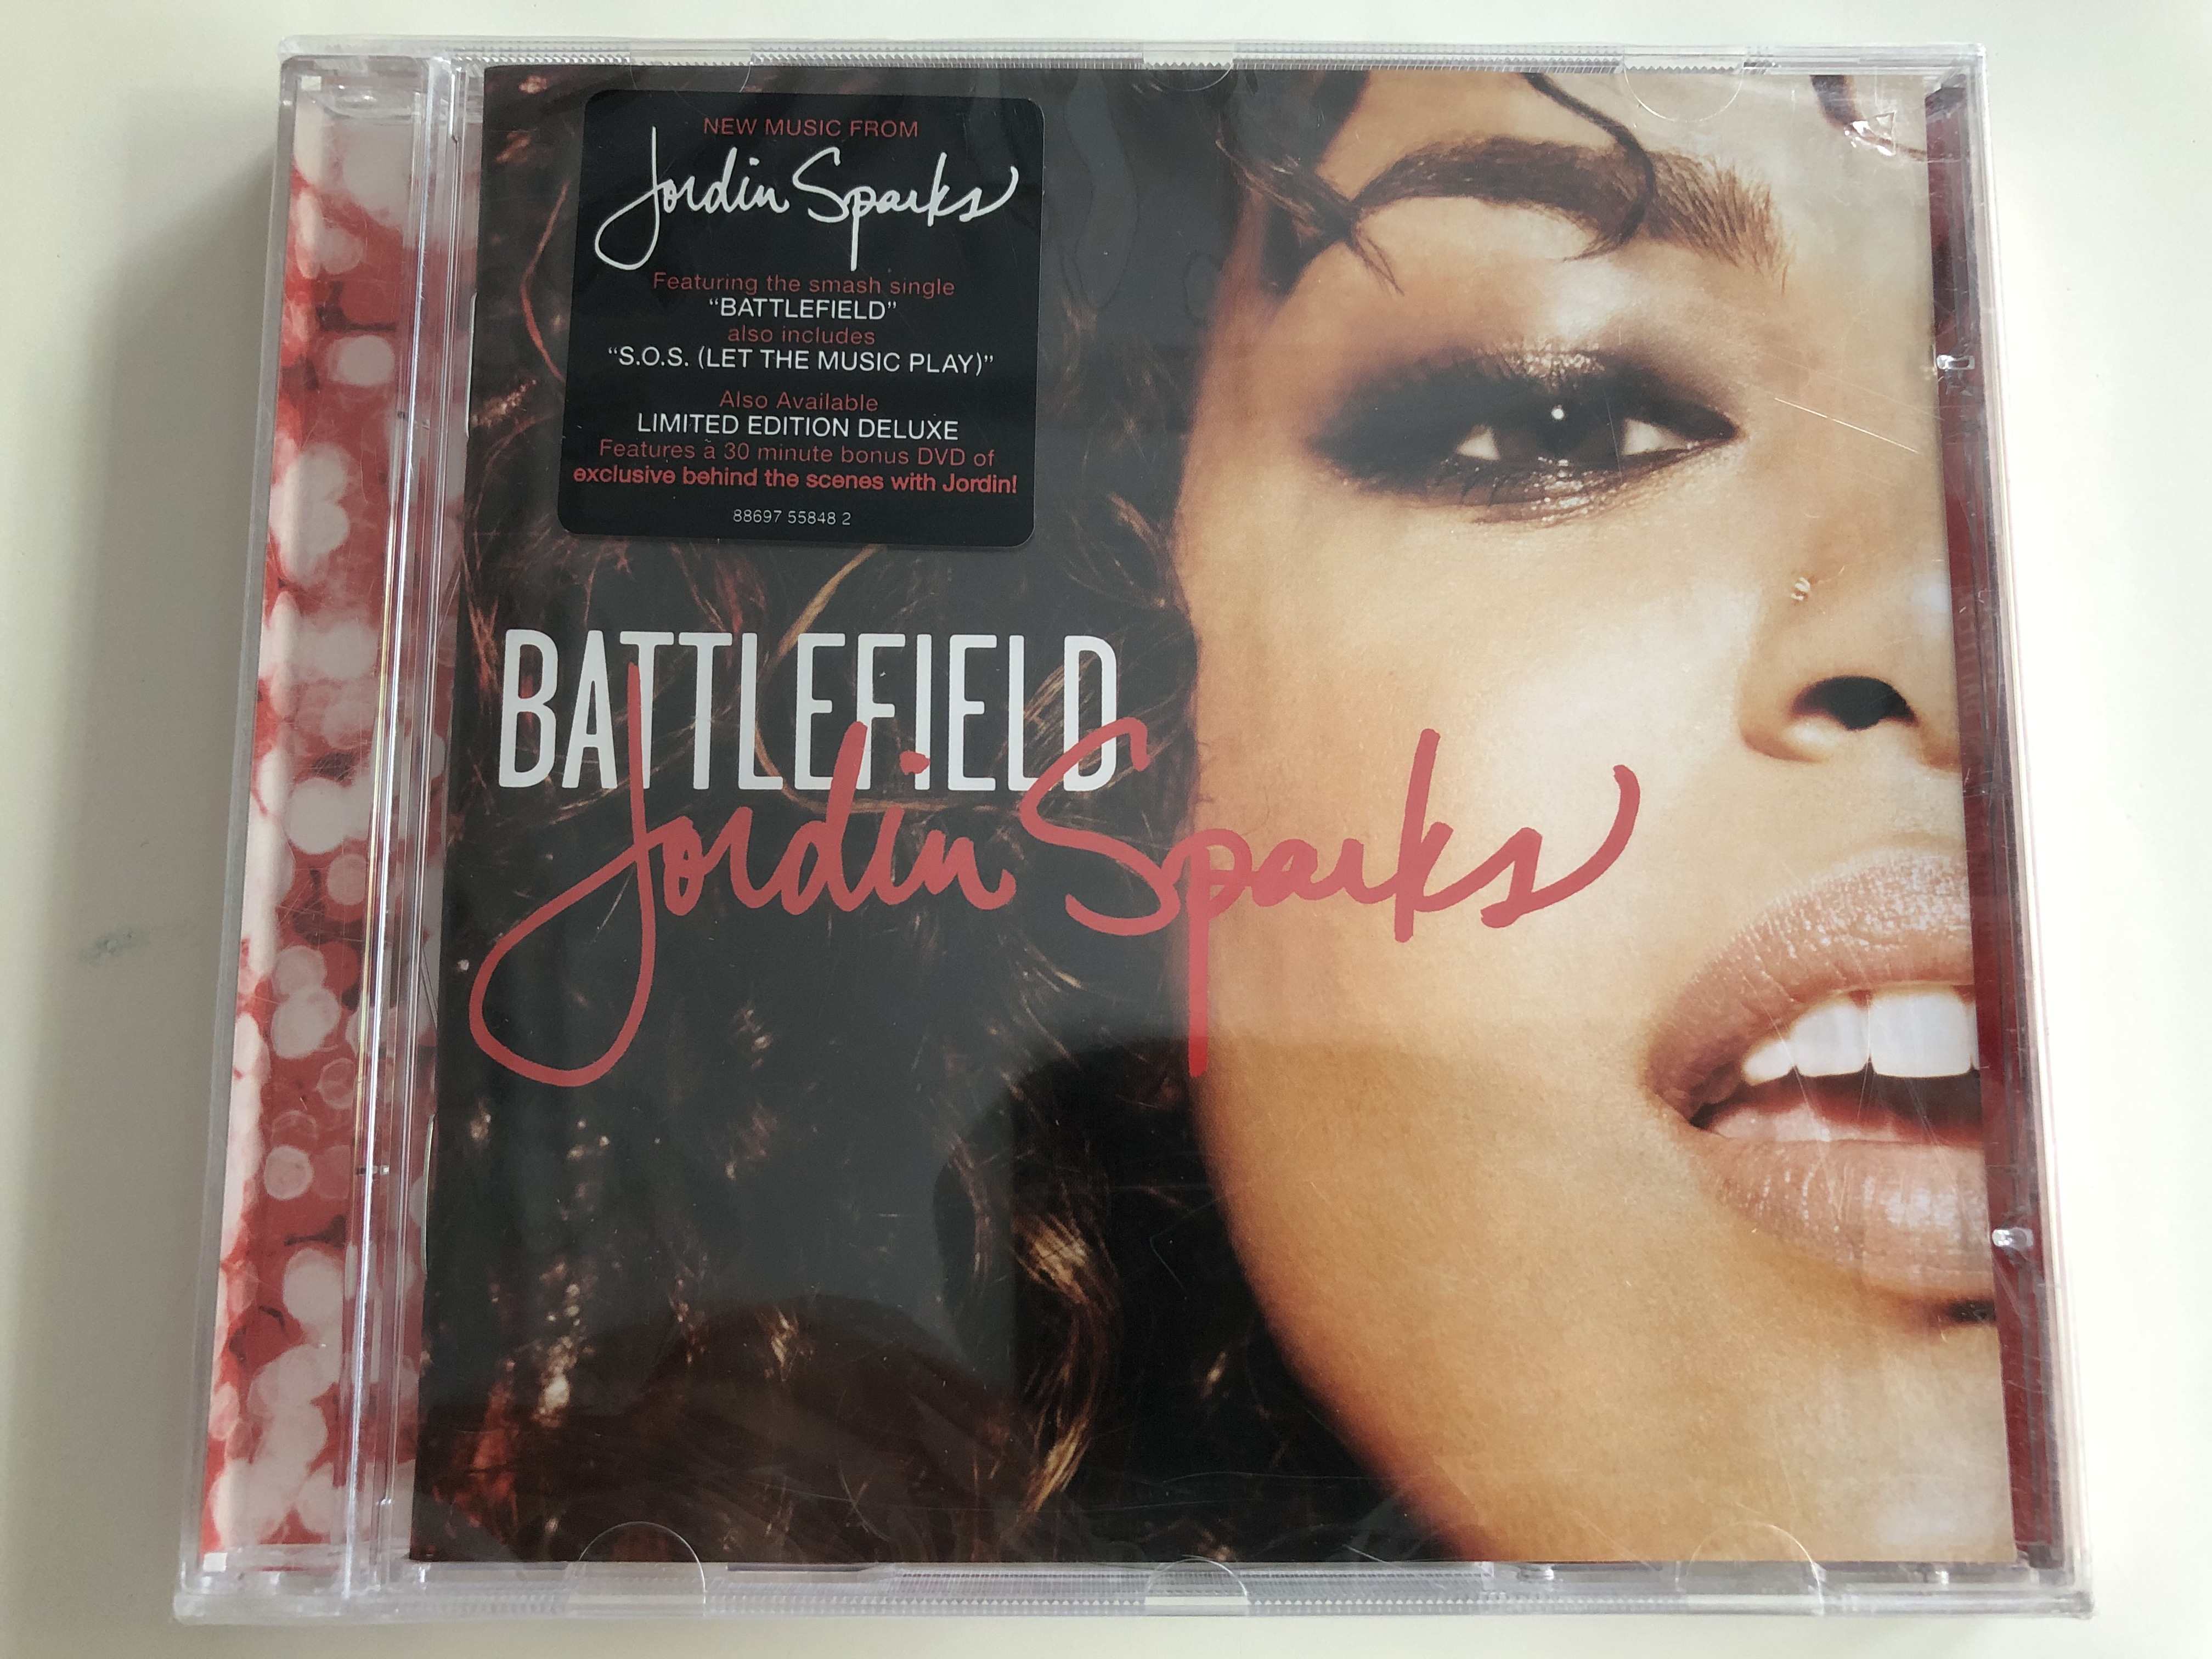 battlefield-jordin-sparks-featuring-the-smash-single-battlefield-also-includes-s.o.s.-let-the-music-play-.-also-available-limited-edition-deluxe-19-recordings-audio-cd-2009-88697-1-.jpg